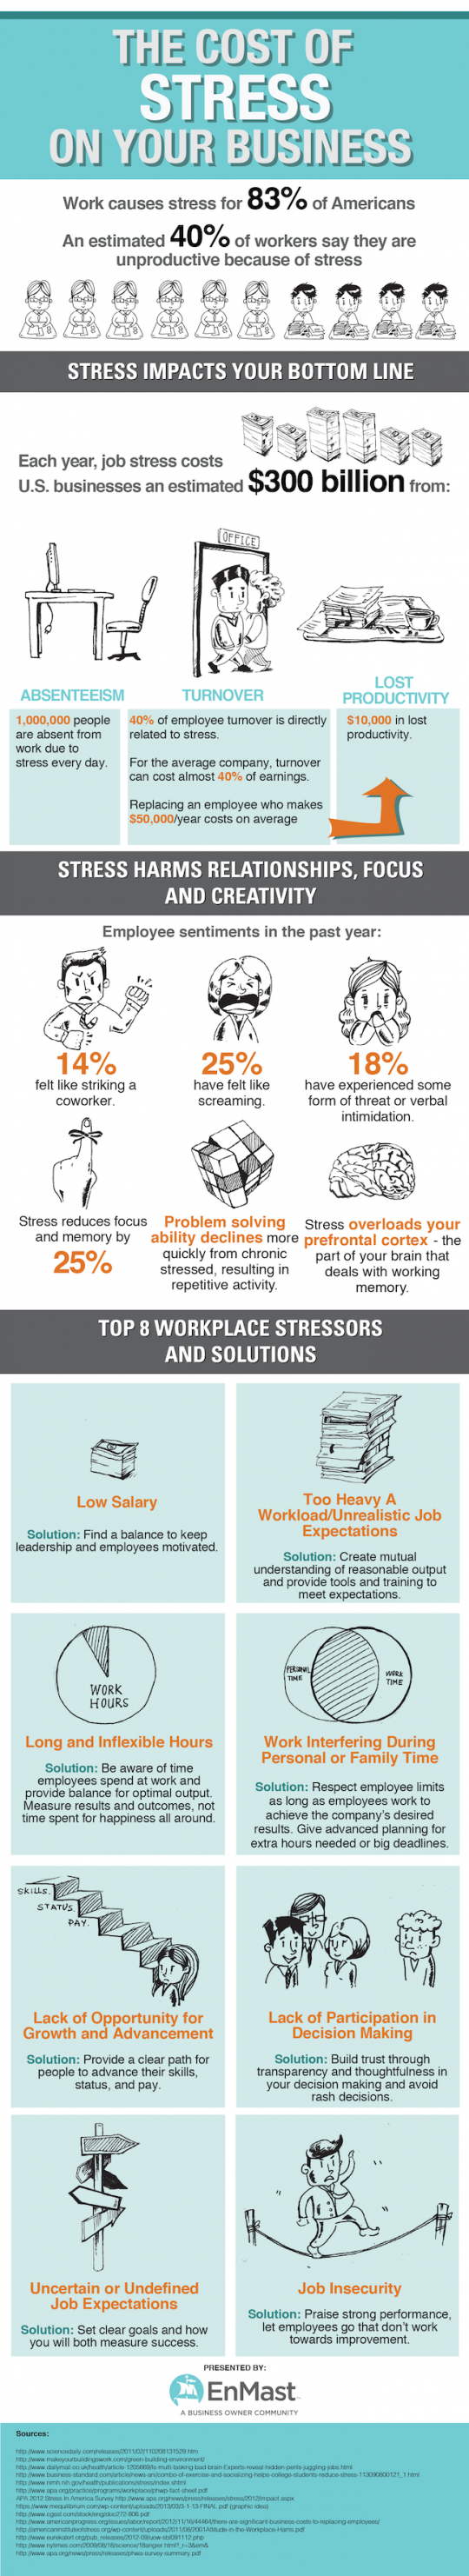 The Cost Of Stress On Your Business